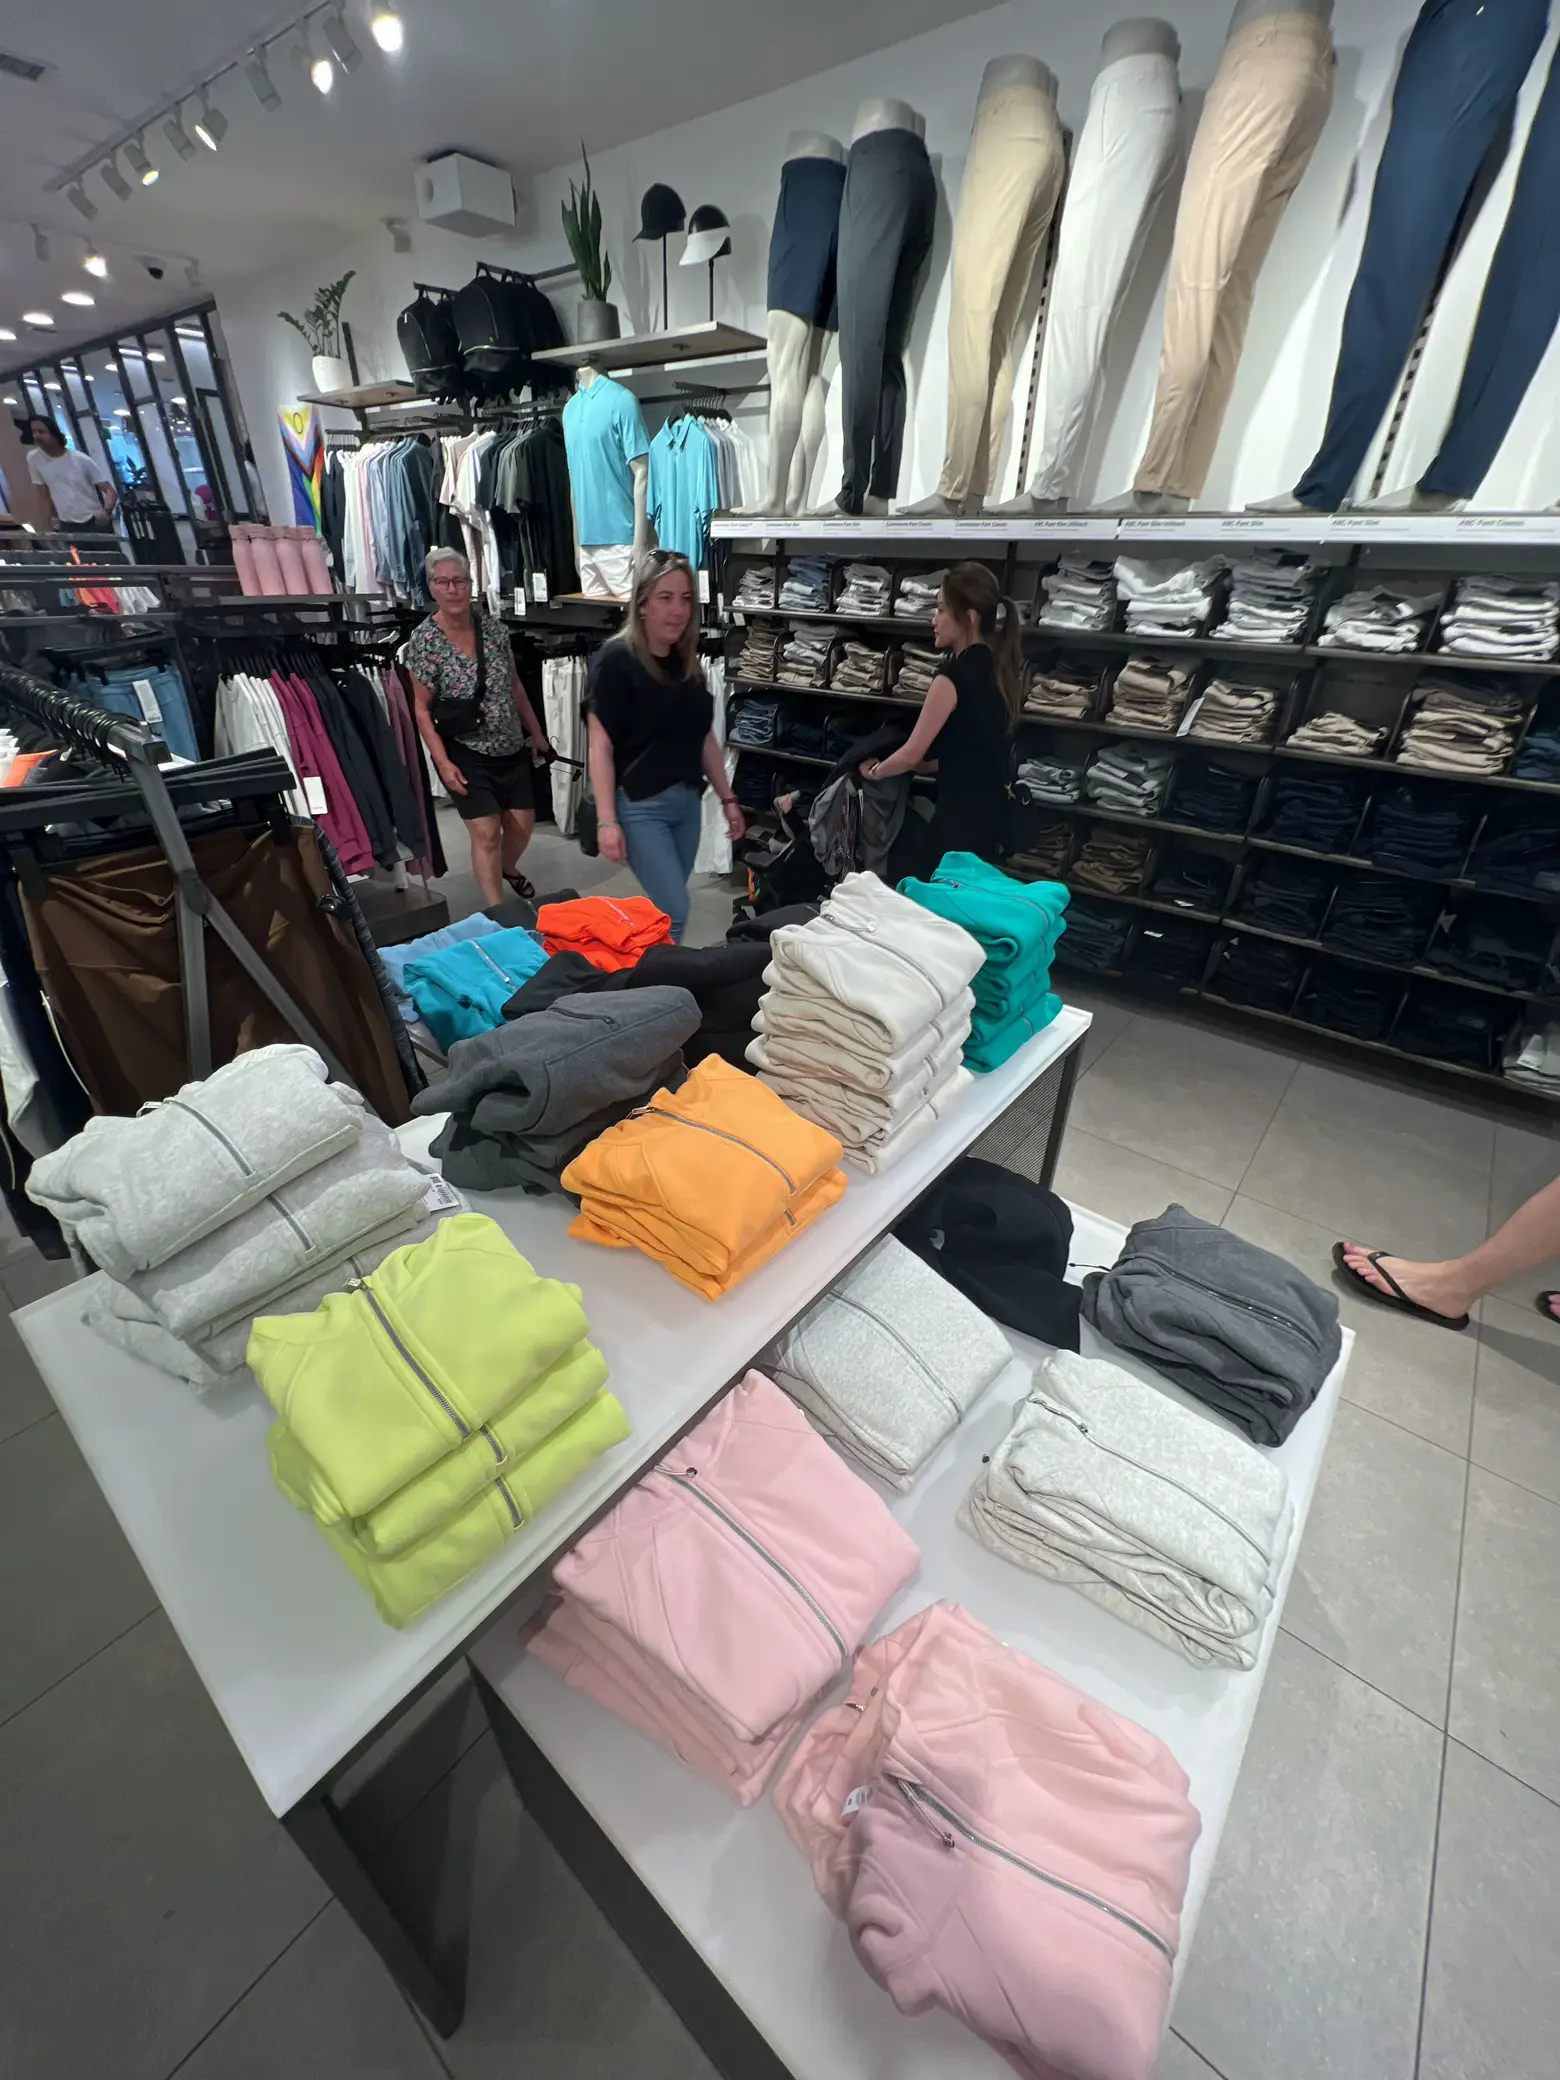 is lululemon really much cheaper in canada?